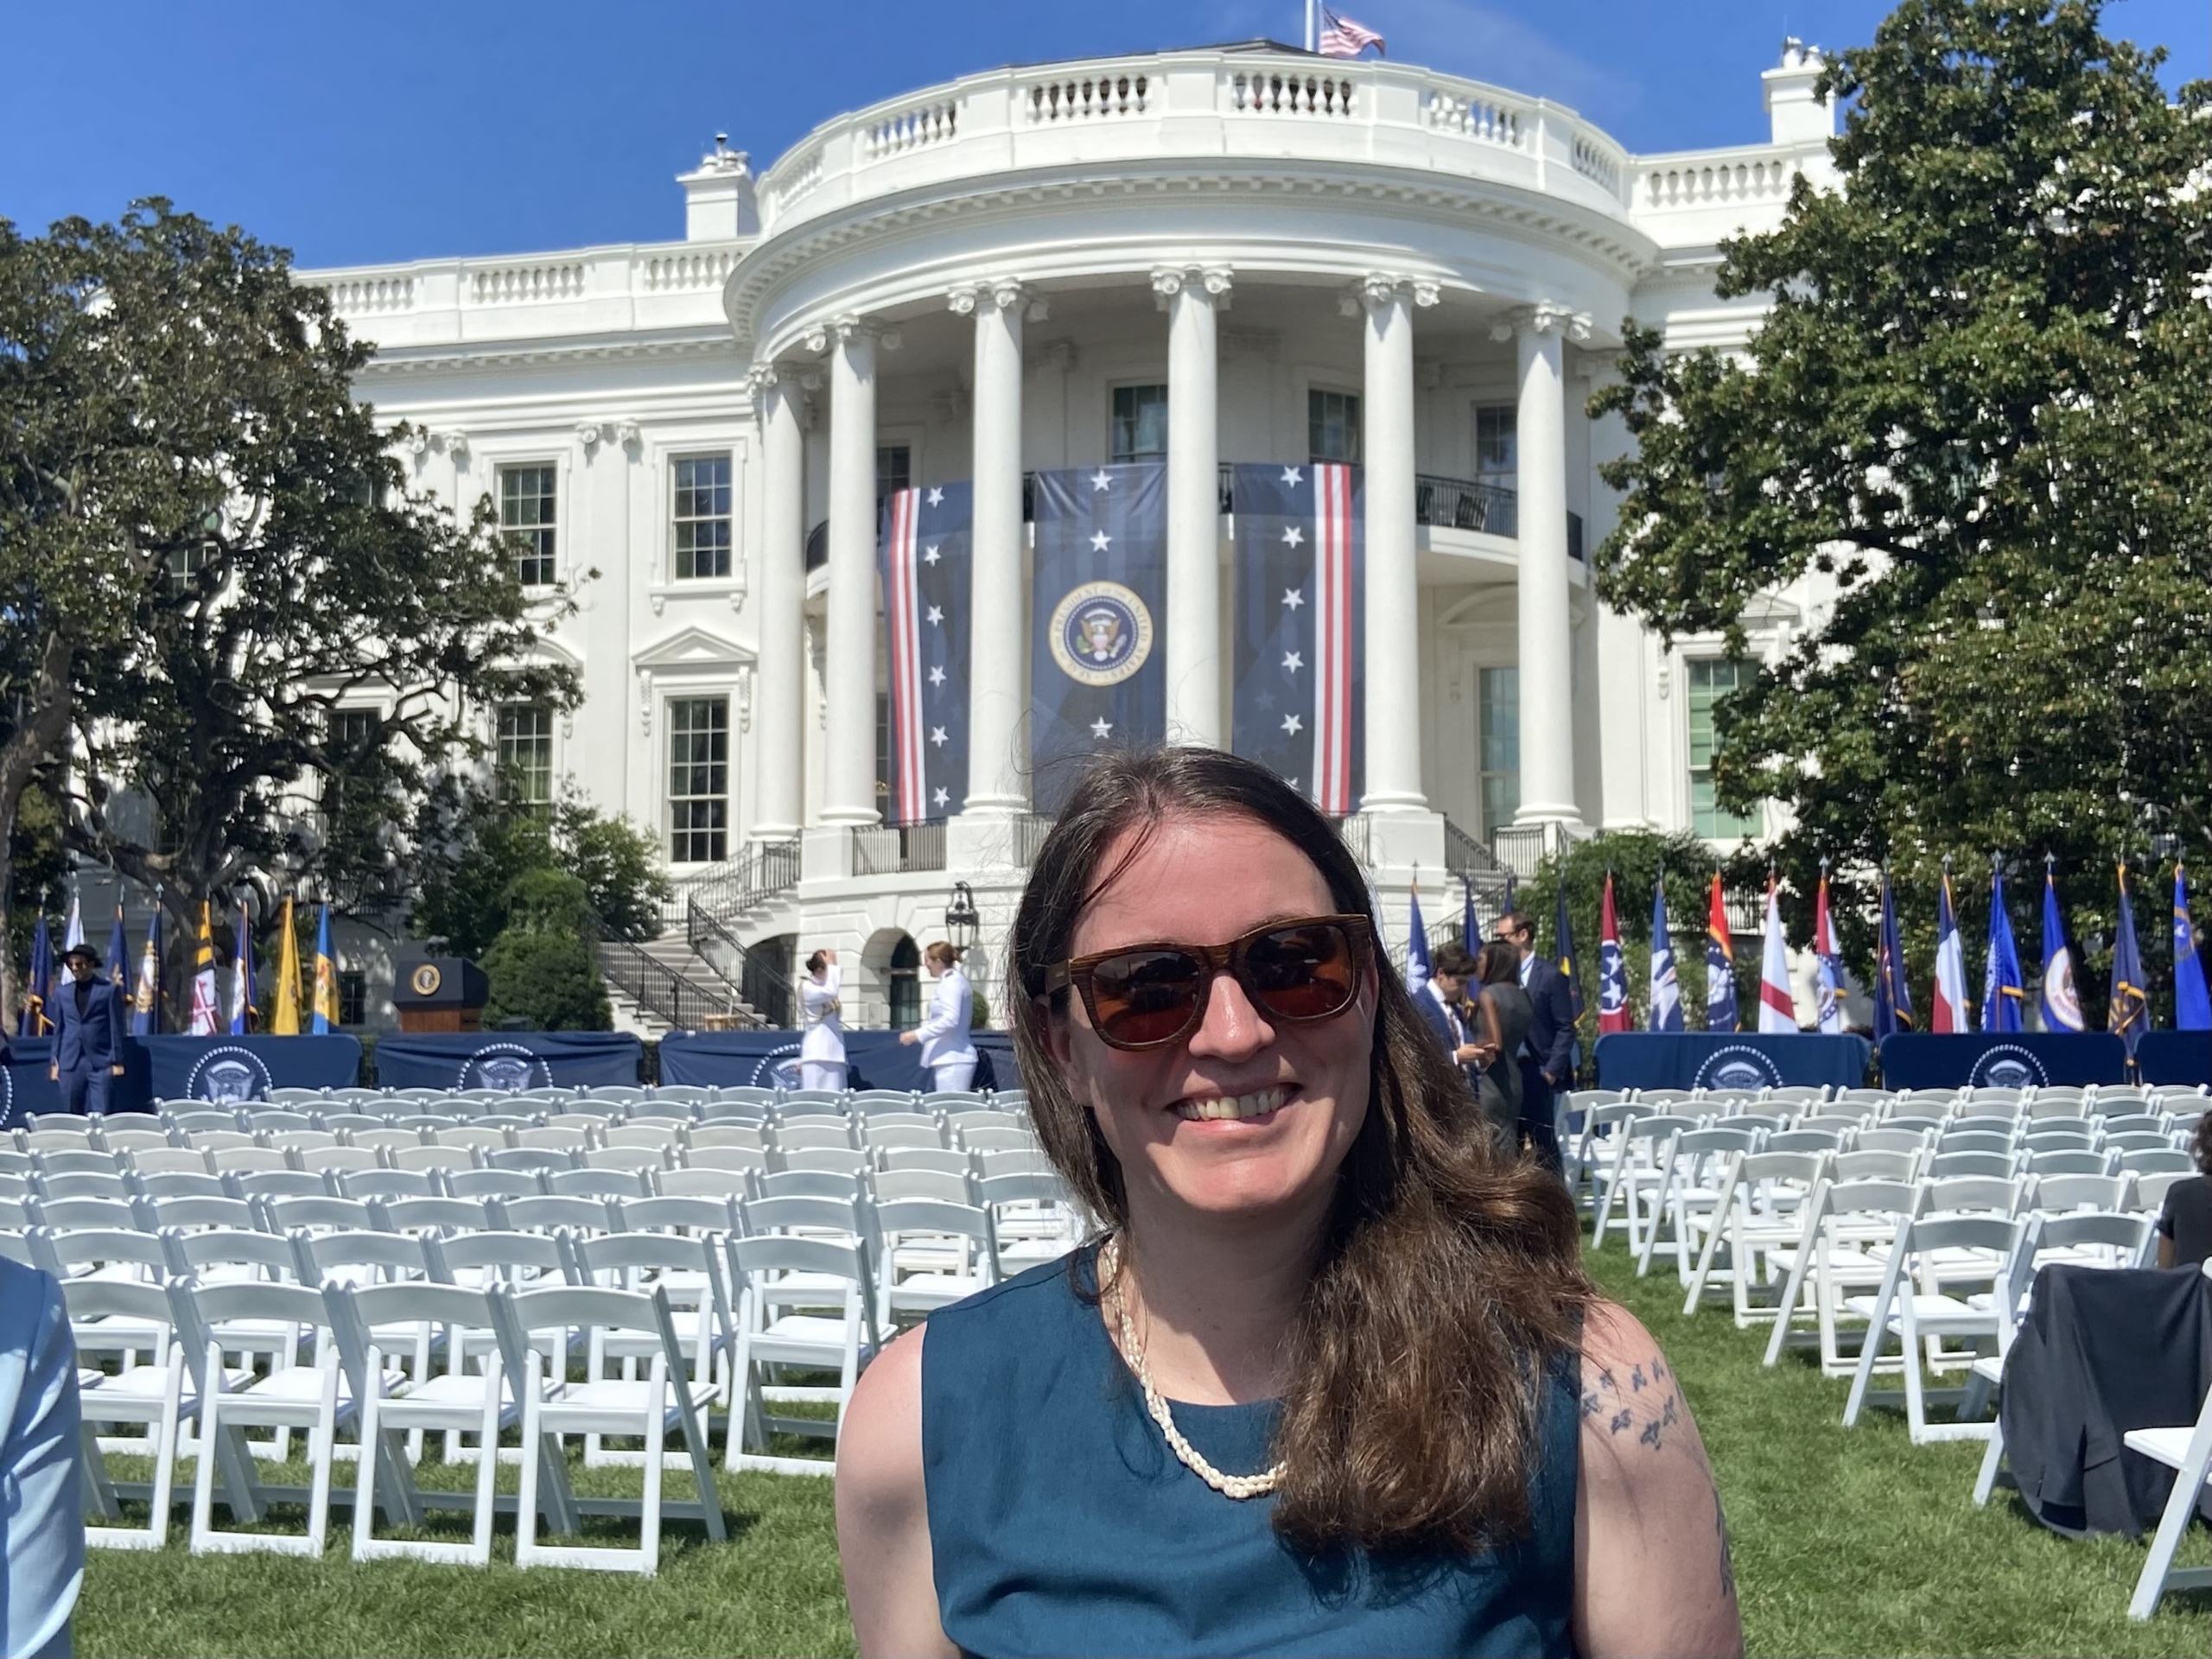 Celeste Meiffren-Swango stands in front of the White House